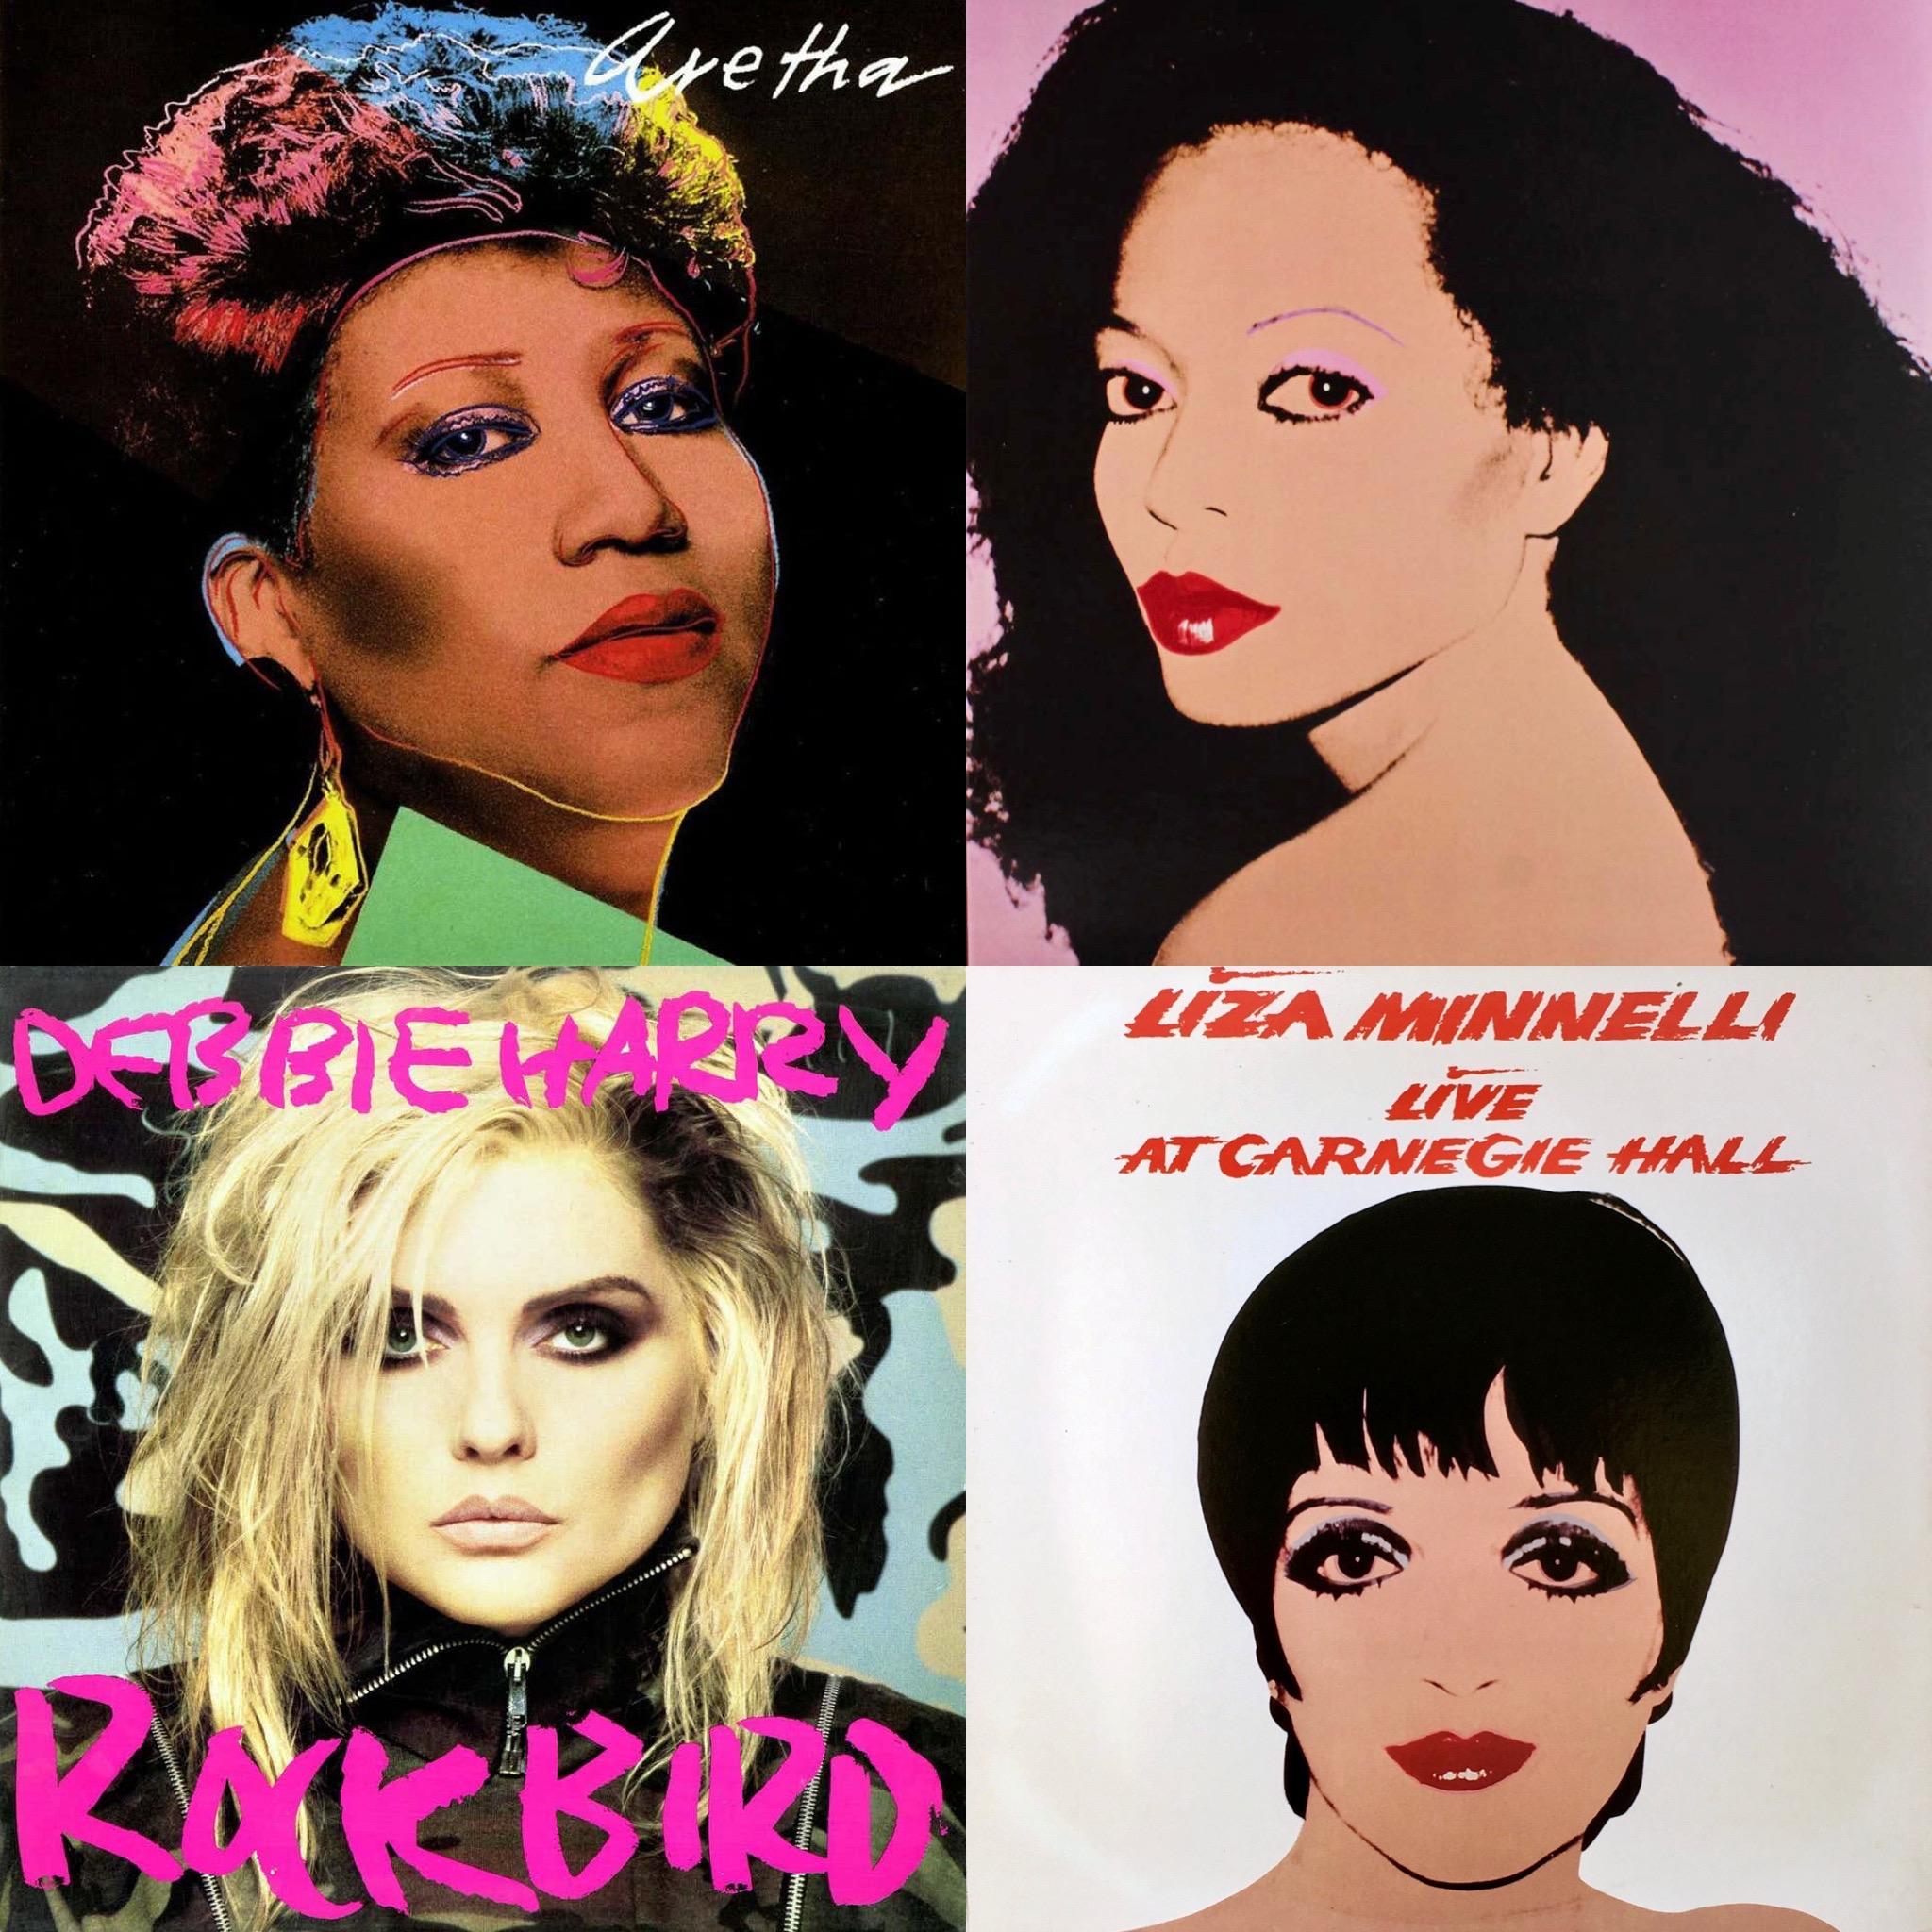 Andy Warhol Record Art 1982-1986:
Set of 4 Andy Warhol illustrated record covers (accompanied by their original records): Warhol's classic rendition of Diana Ross, Aretha Franklin, Debbie Harry & Liza Minnelli when combined, make for fantastic